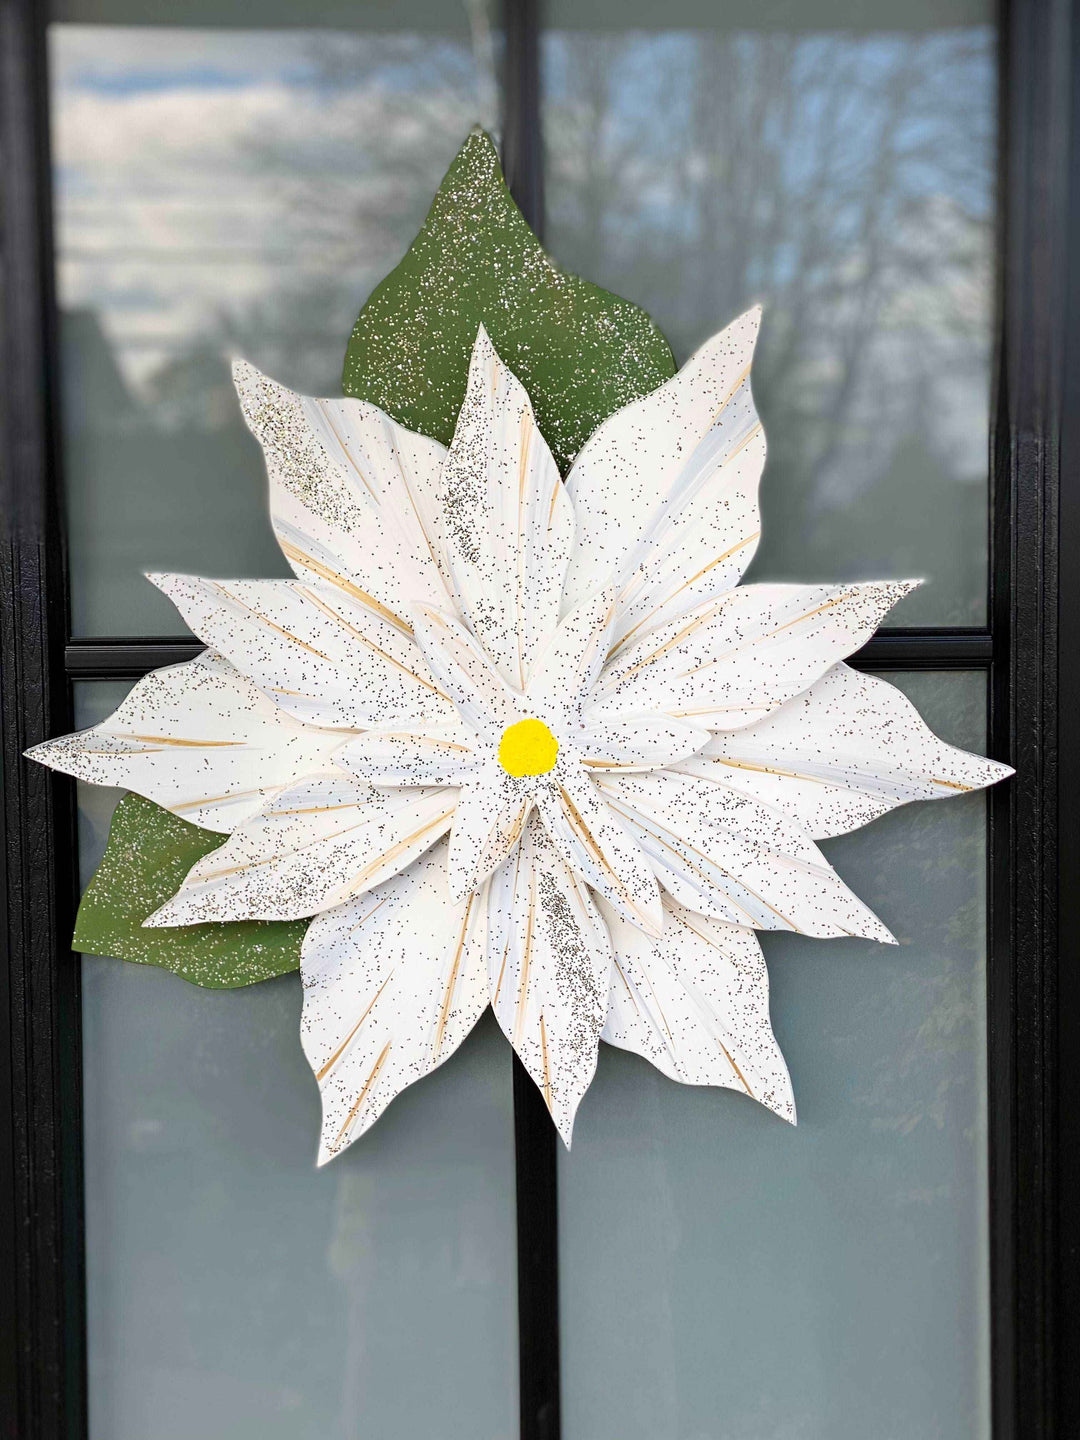 Atlantic Wood N Wares Home & Garden>Home Décor>Wall Decor>Wall Hangings 14.5 x 14.5 / White The Poinsettia:A Beautiful and Unique Way to Celebrate the Holiday Season CPL001